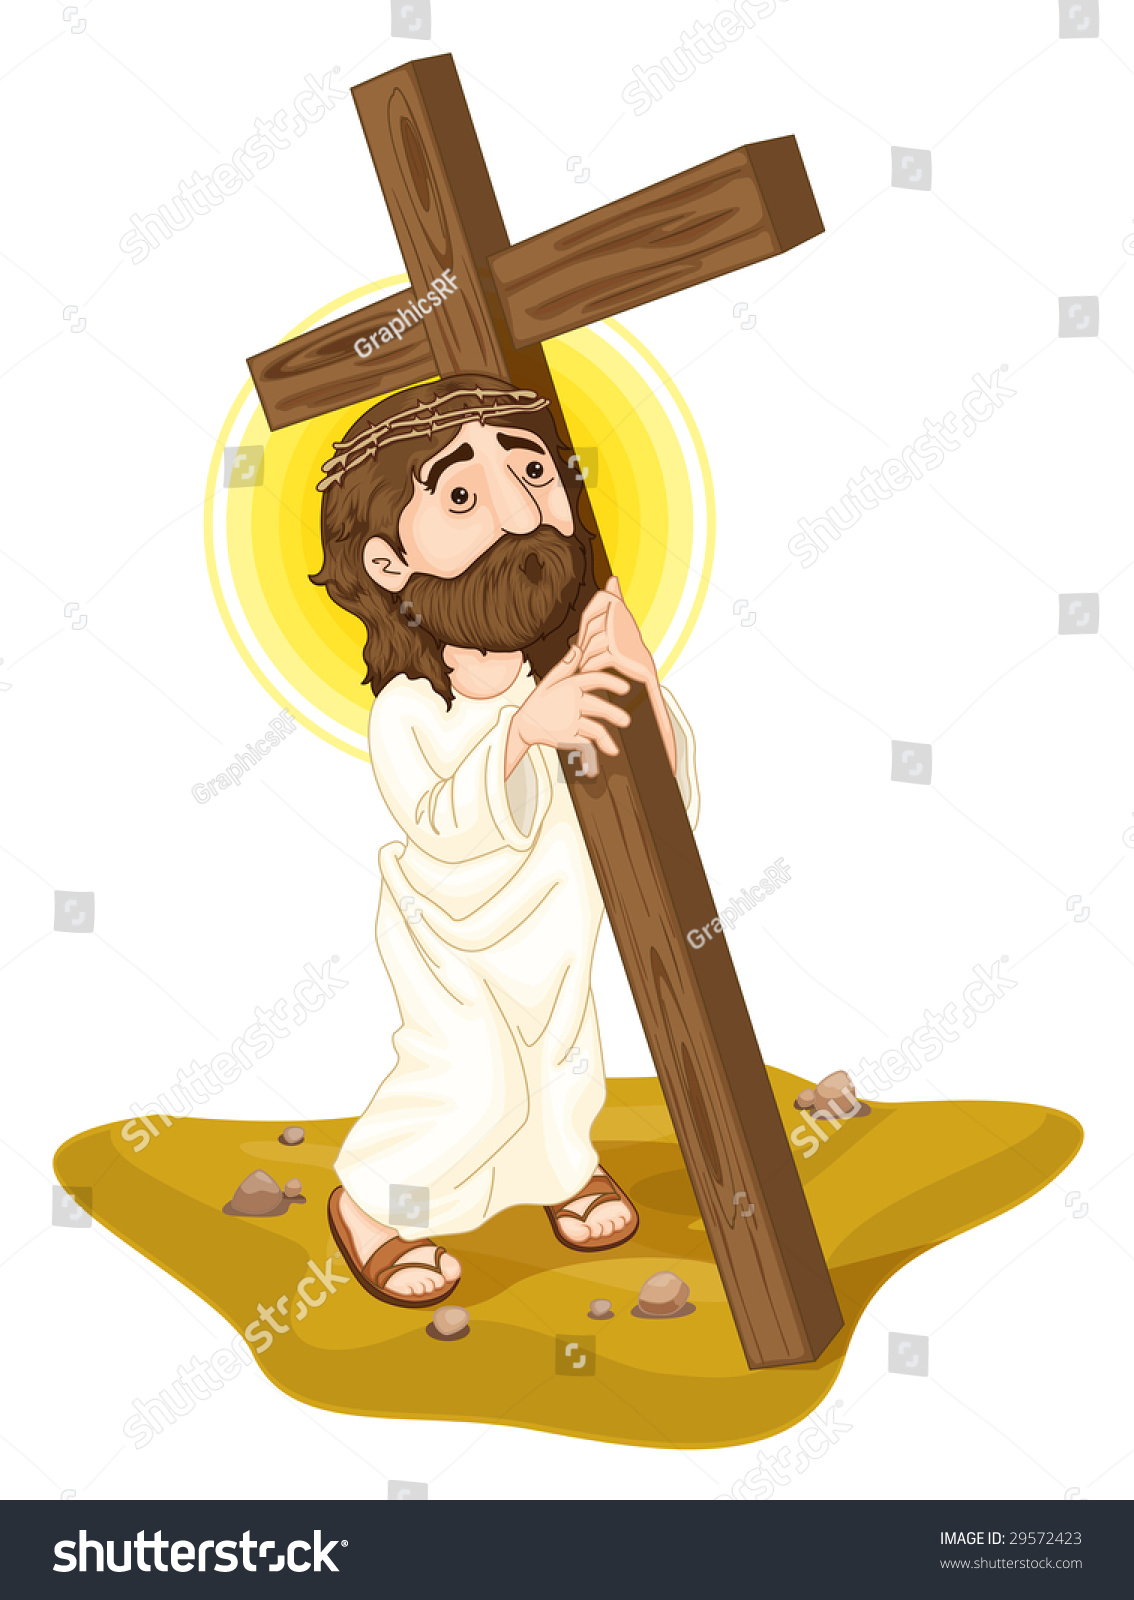 free clipart of jesus carrying the cross - photo #50